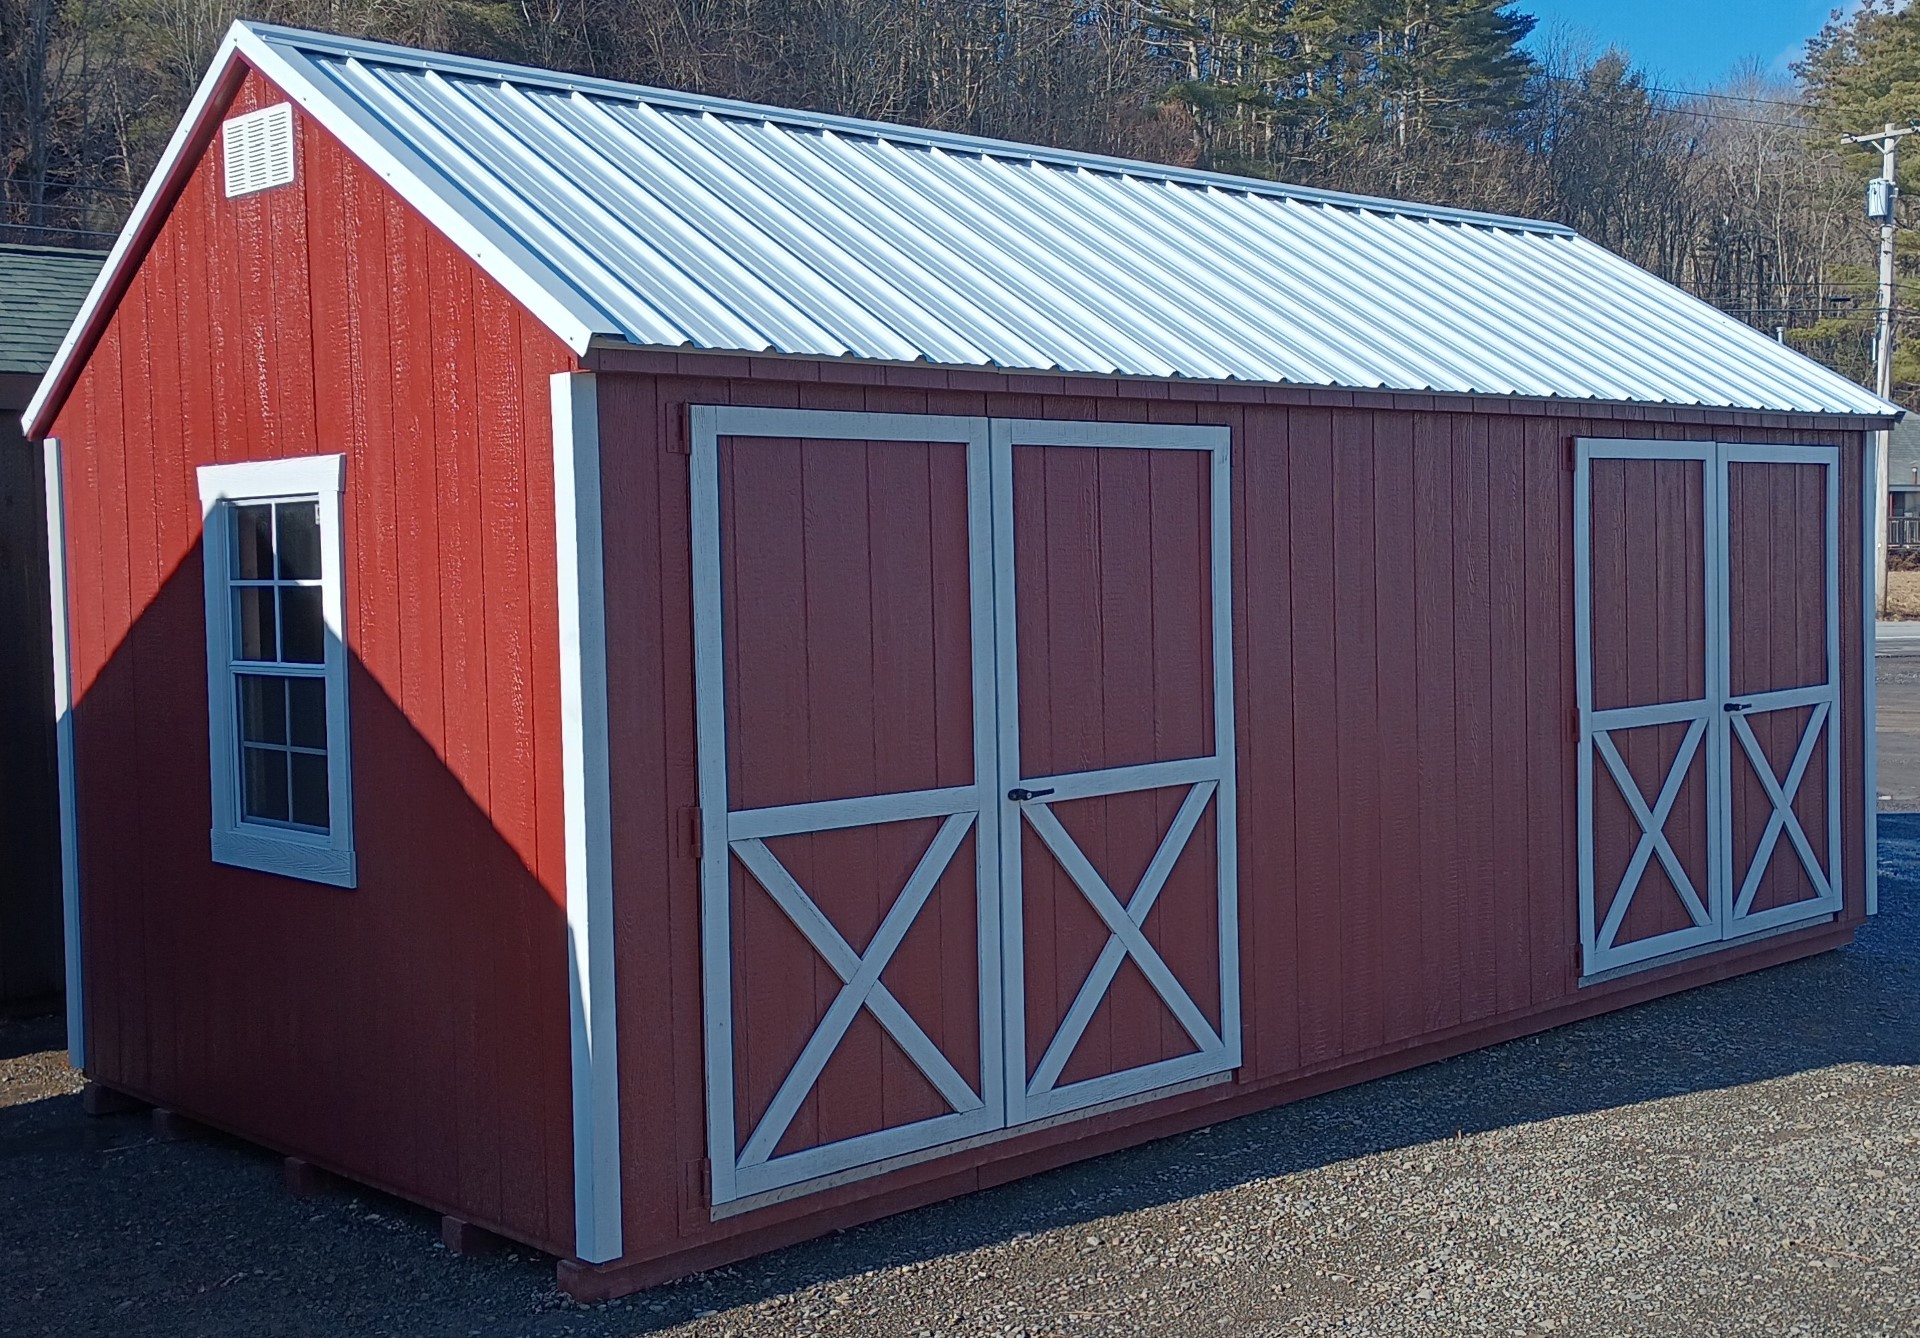 Red cape cod with white trim, metal roof, two sets of double doors on twenty foot side and a window on each end